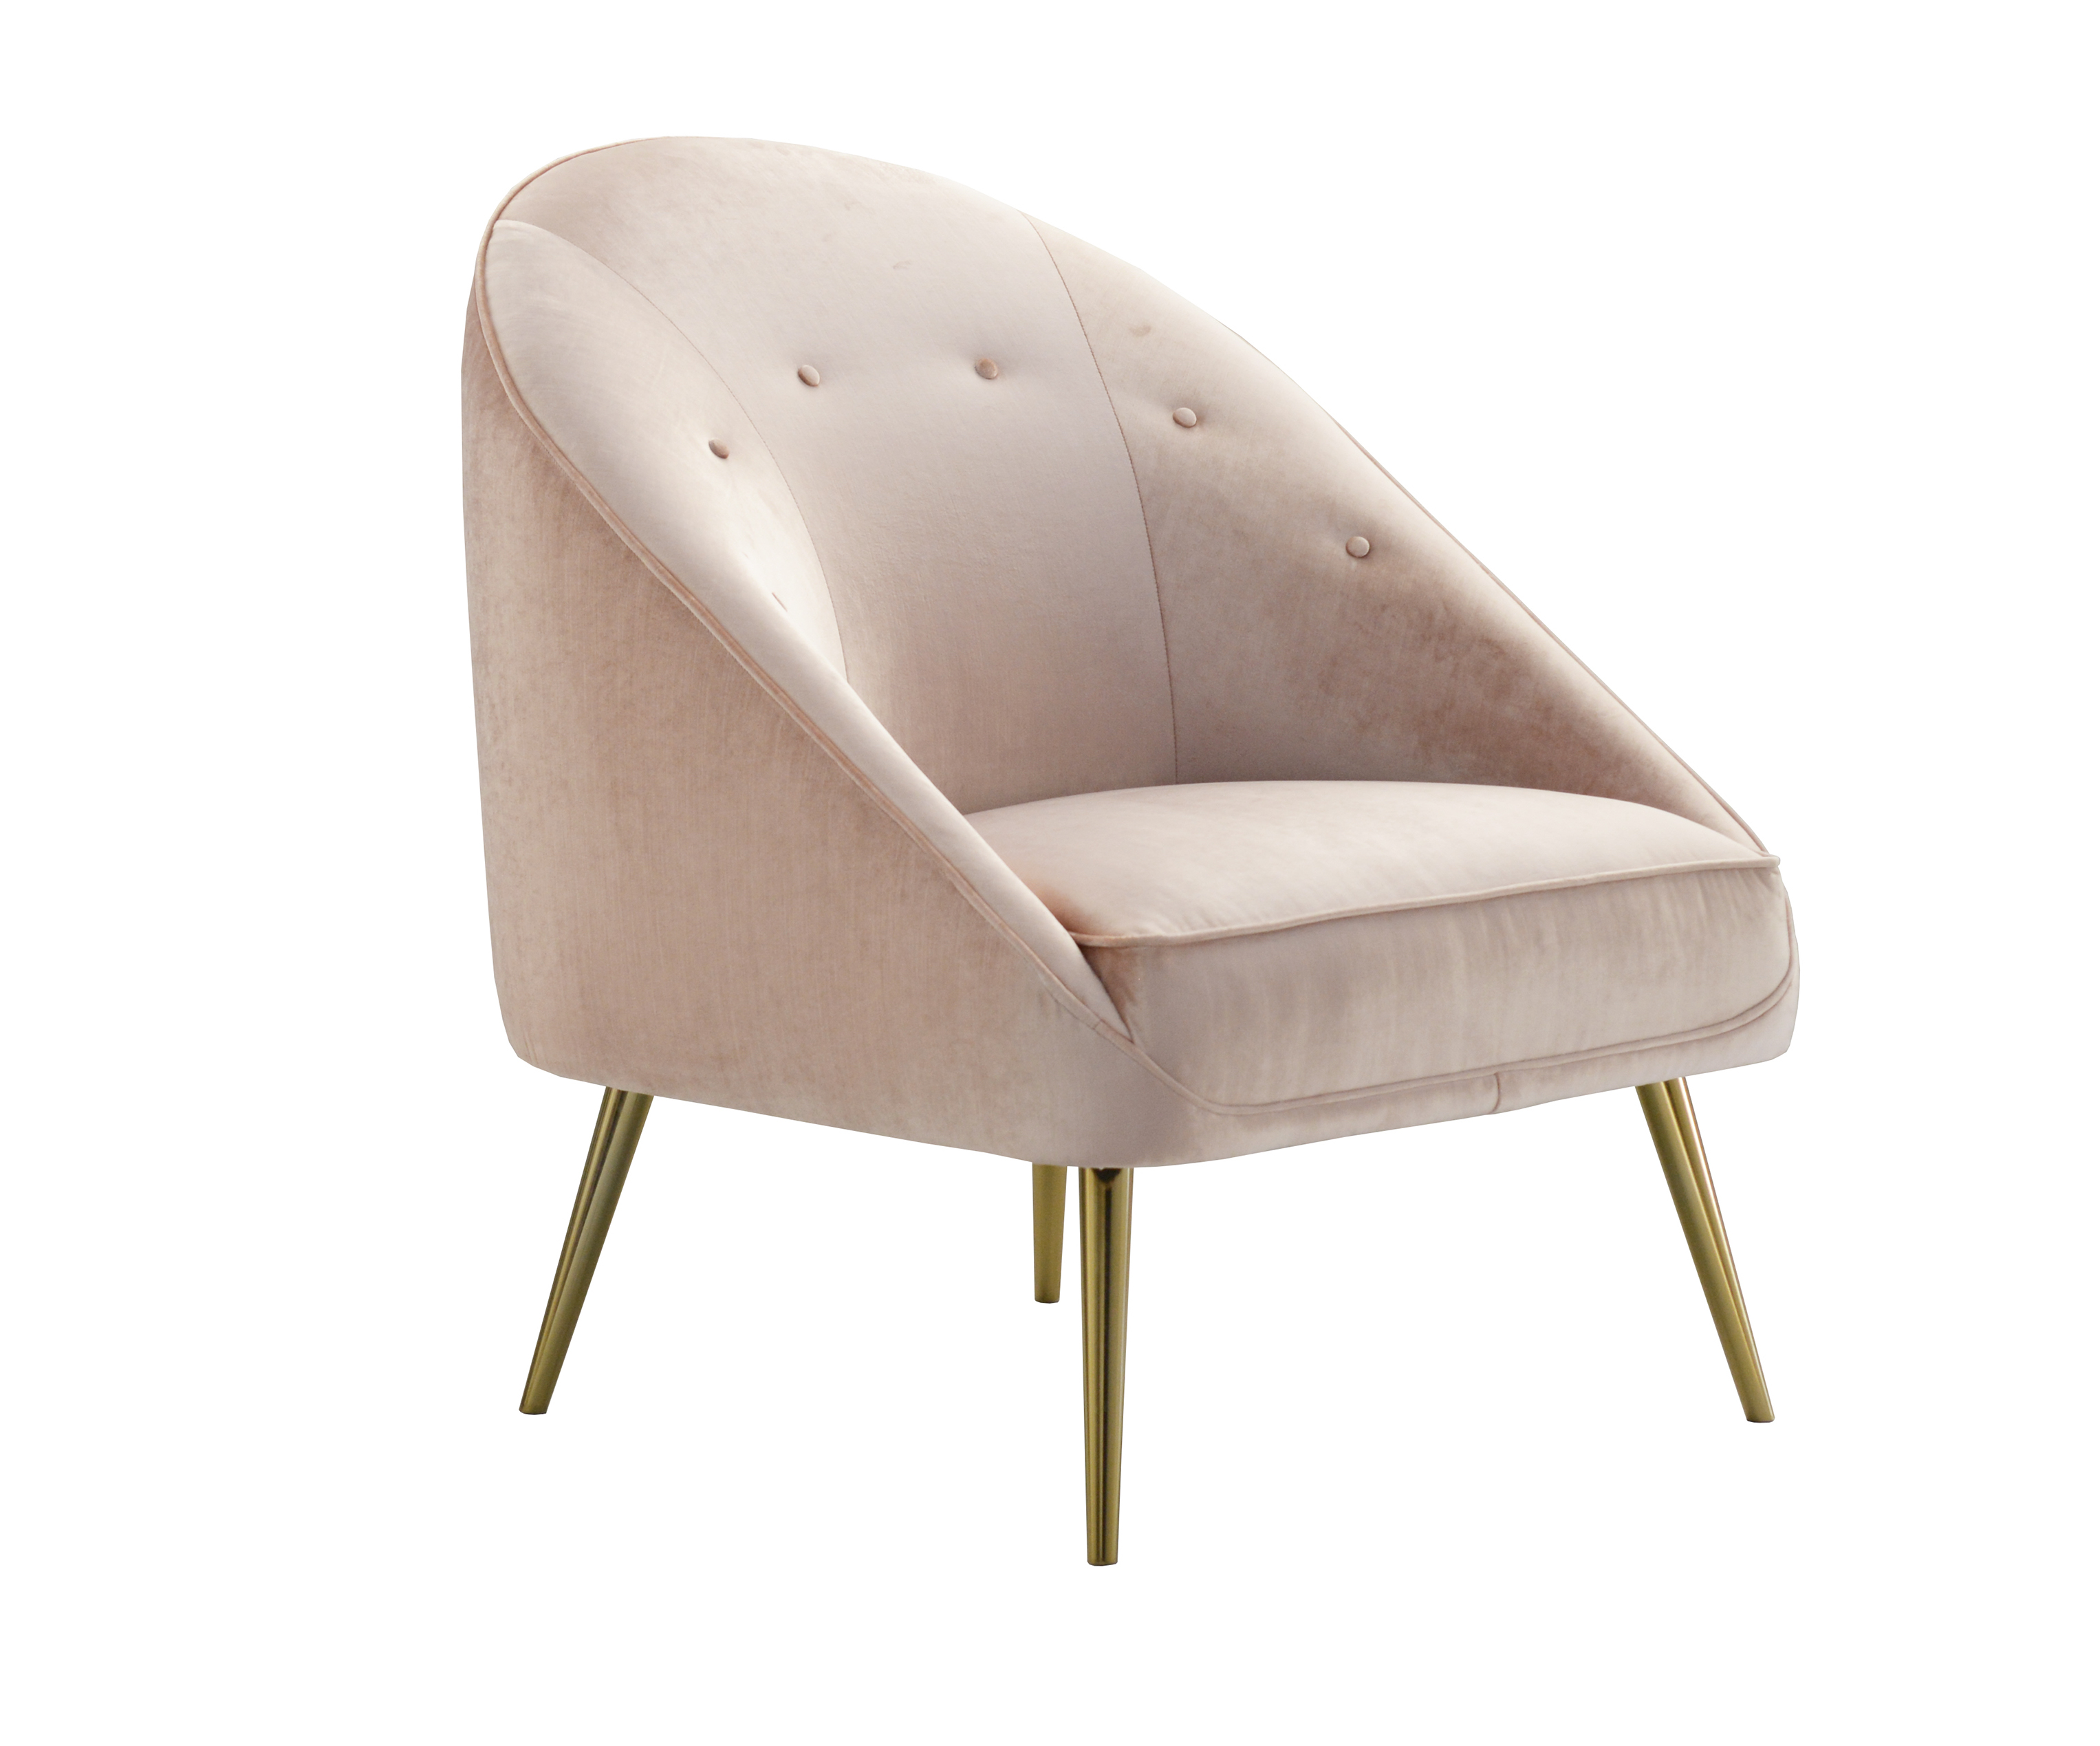 Nathan Anthony Juliet chair